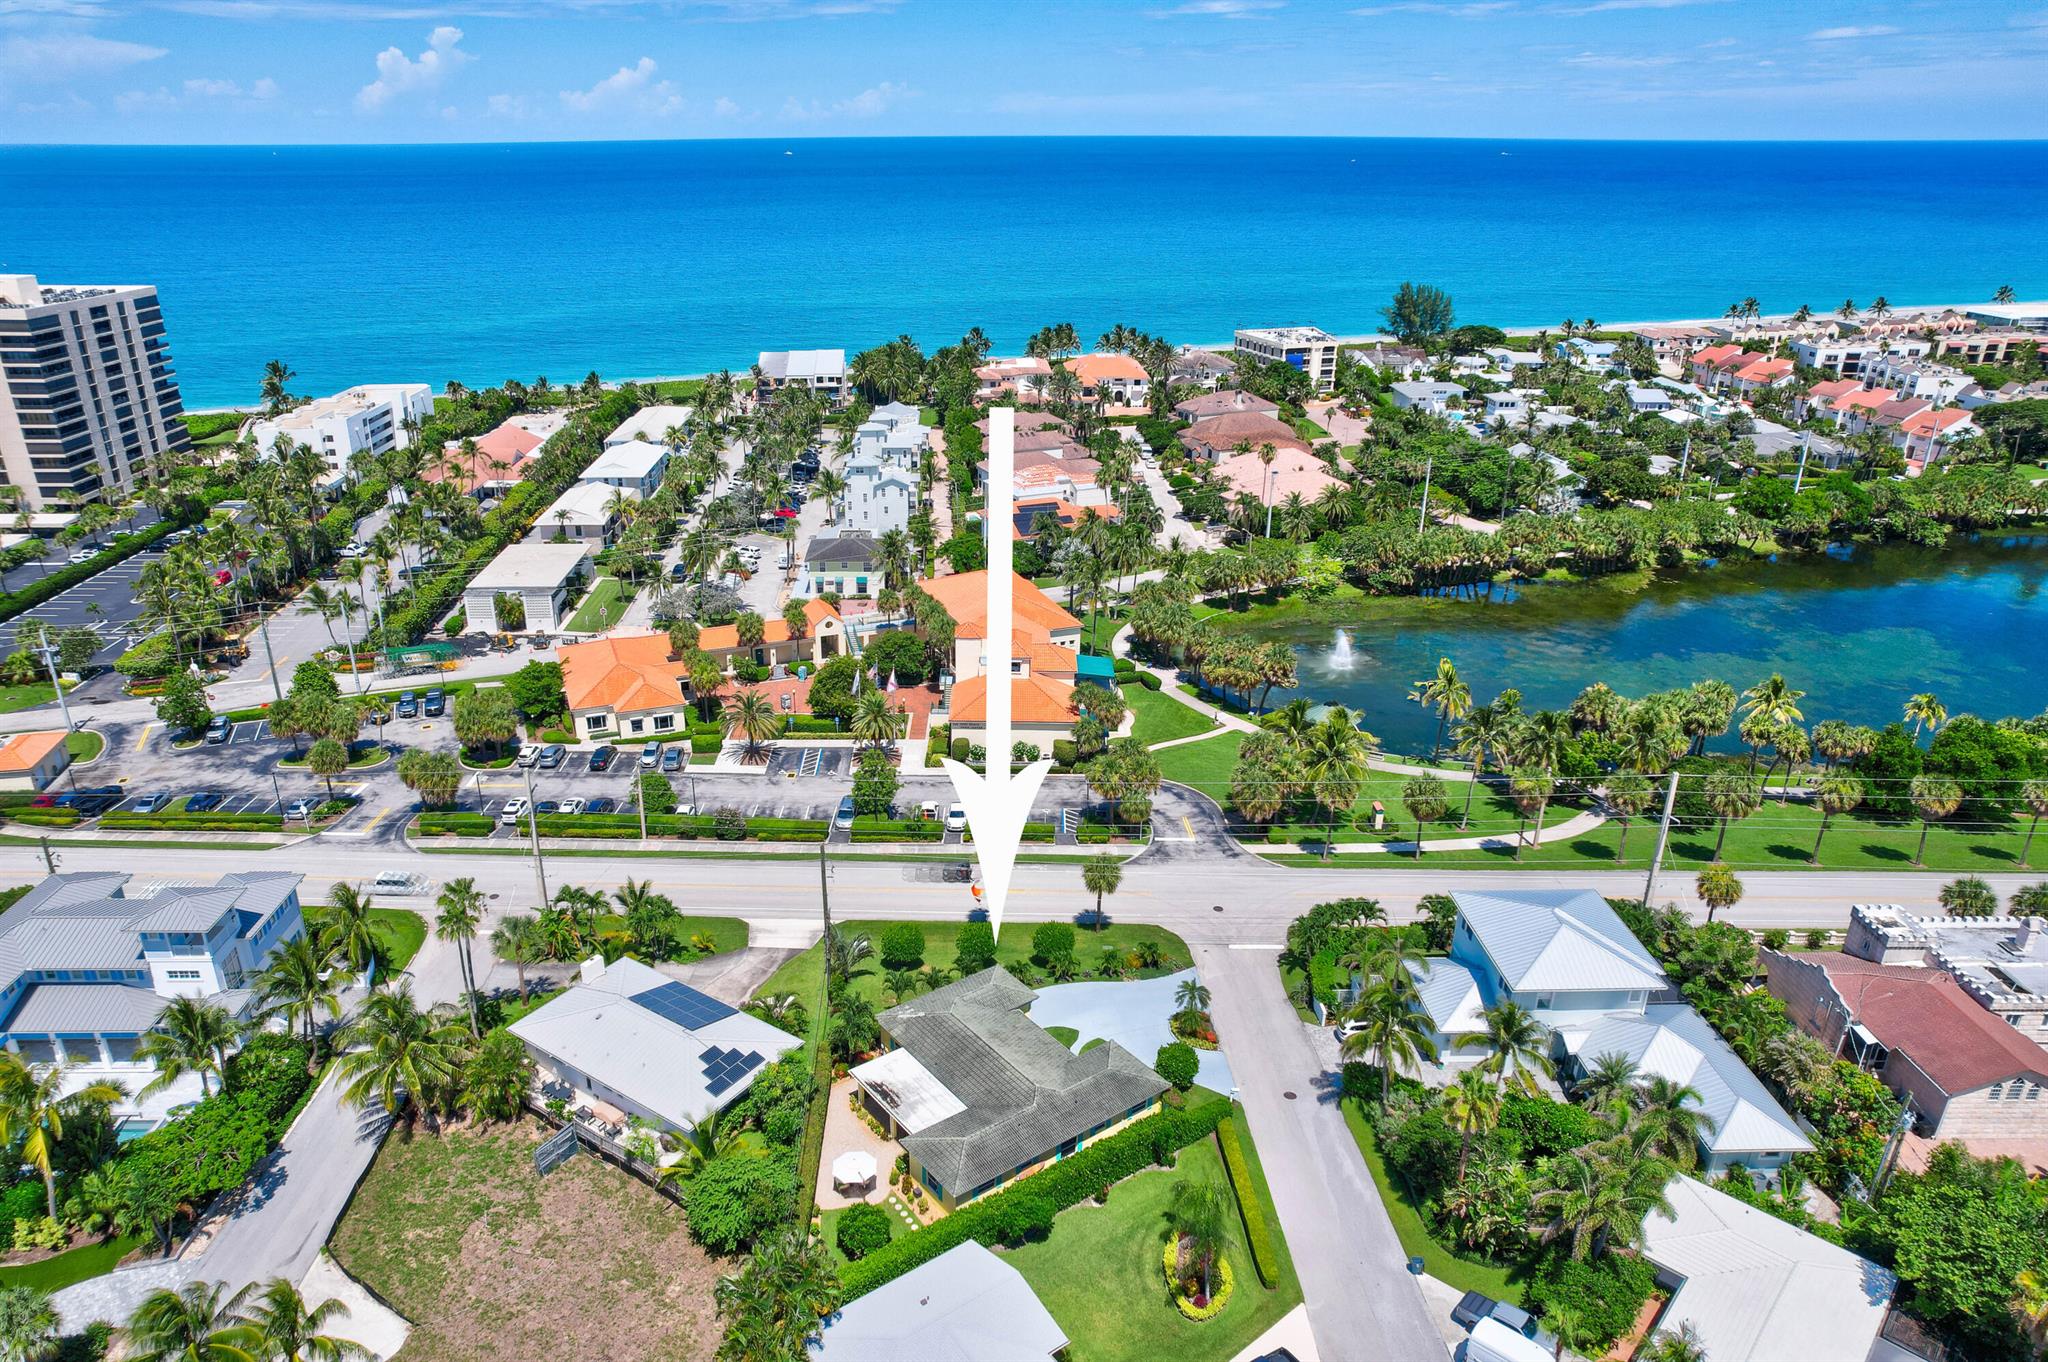 Welcome to your dream beach house in the picturesque town of Juno Beach. This charming 3 bedroom, 2 bathroom home is the perfect blend of coast living and investment potential. Whether you're looking for a serene beach retreat or a lucrative short term, turnkey rental, this home has it all. One of the few residences overlooking the serene Pelican Lake, this property boasts breathtaking views and tranquility. Just a block from the pristine sands, you'll enjoy the ultimate beach lifestyle. Step inside to discover beautiful hardwood floors throughout, highlighting the meticulous renovations. The spacious and bright living areas feature impact windows, ensuring safety and energy efficiency. The oversized patio is perfect for entertaining or simply relaxing, with plenty of room to add a pool in your backyard oasis. Conveniently located near the Juno Beach Pier, fine shopping, exquisite dining options, and just a short drive to the airport, this beach house offers both seclusion and accessibility. Don't miss the opportunity to own a piece of paradise in Juno Beach!